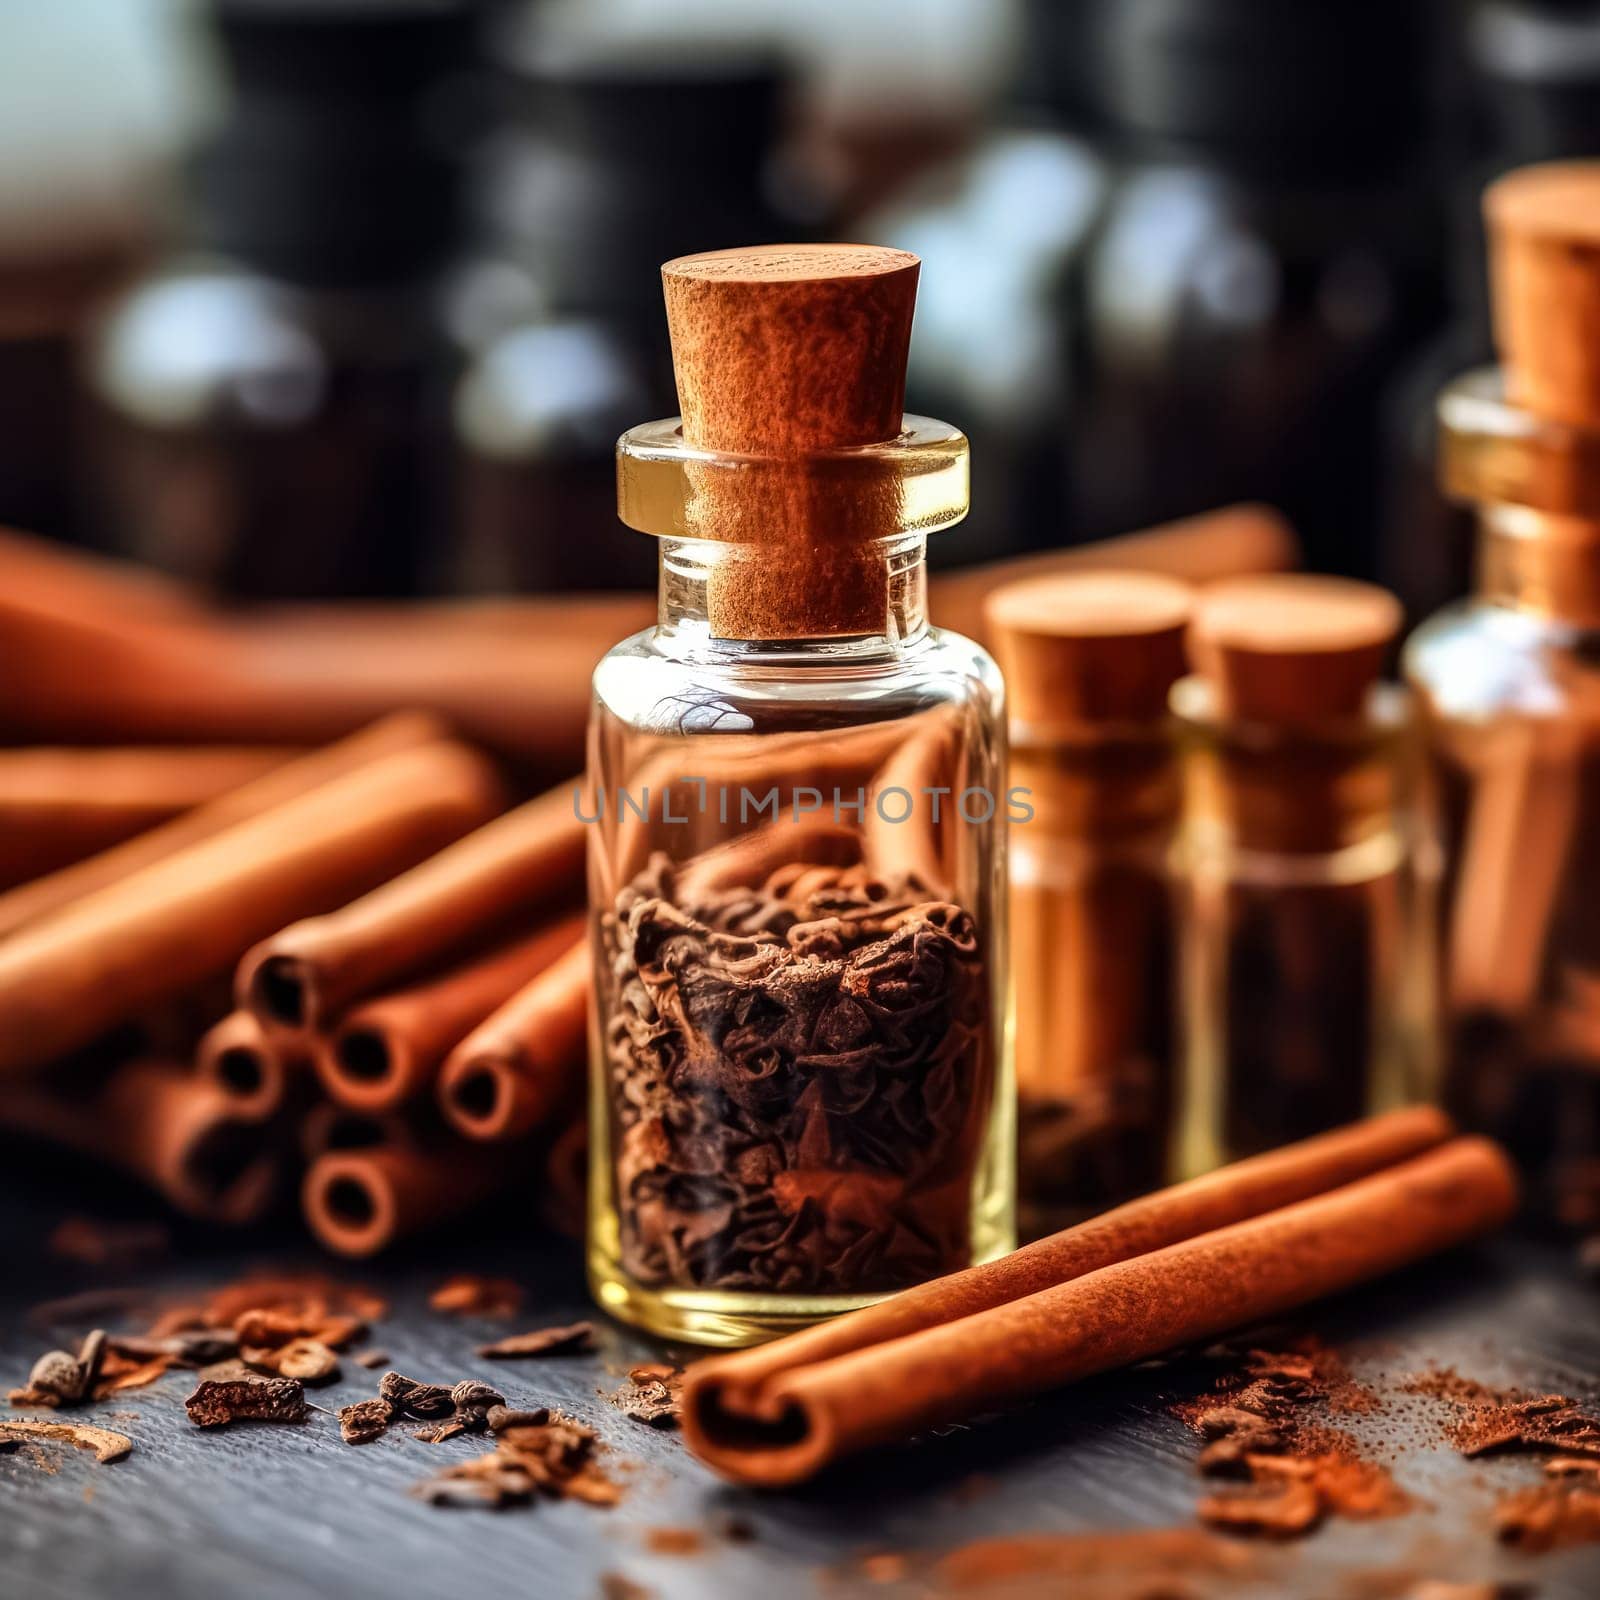 Elevate your culinary journey with this collection of exquisite spices cinnamon, star anise, coriander, and anise, beautifully presented in glass bottles